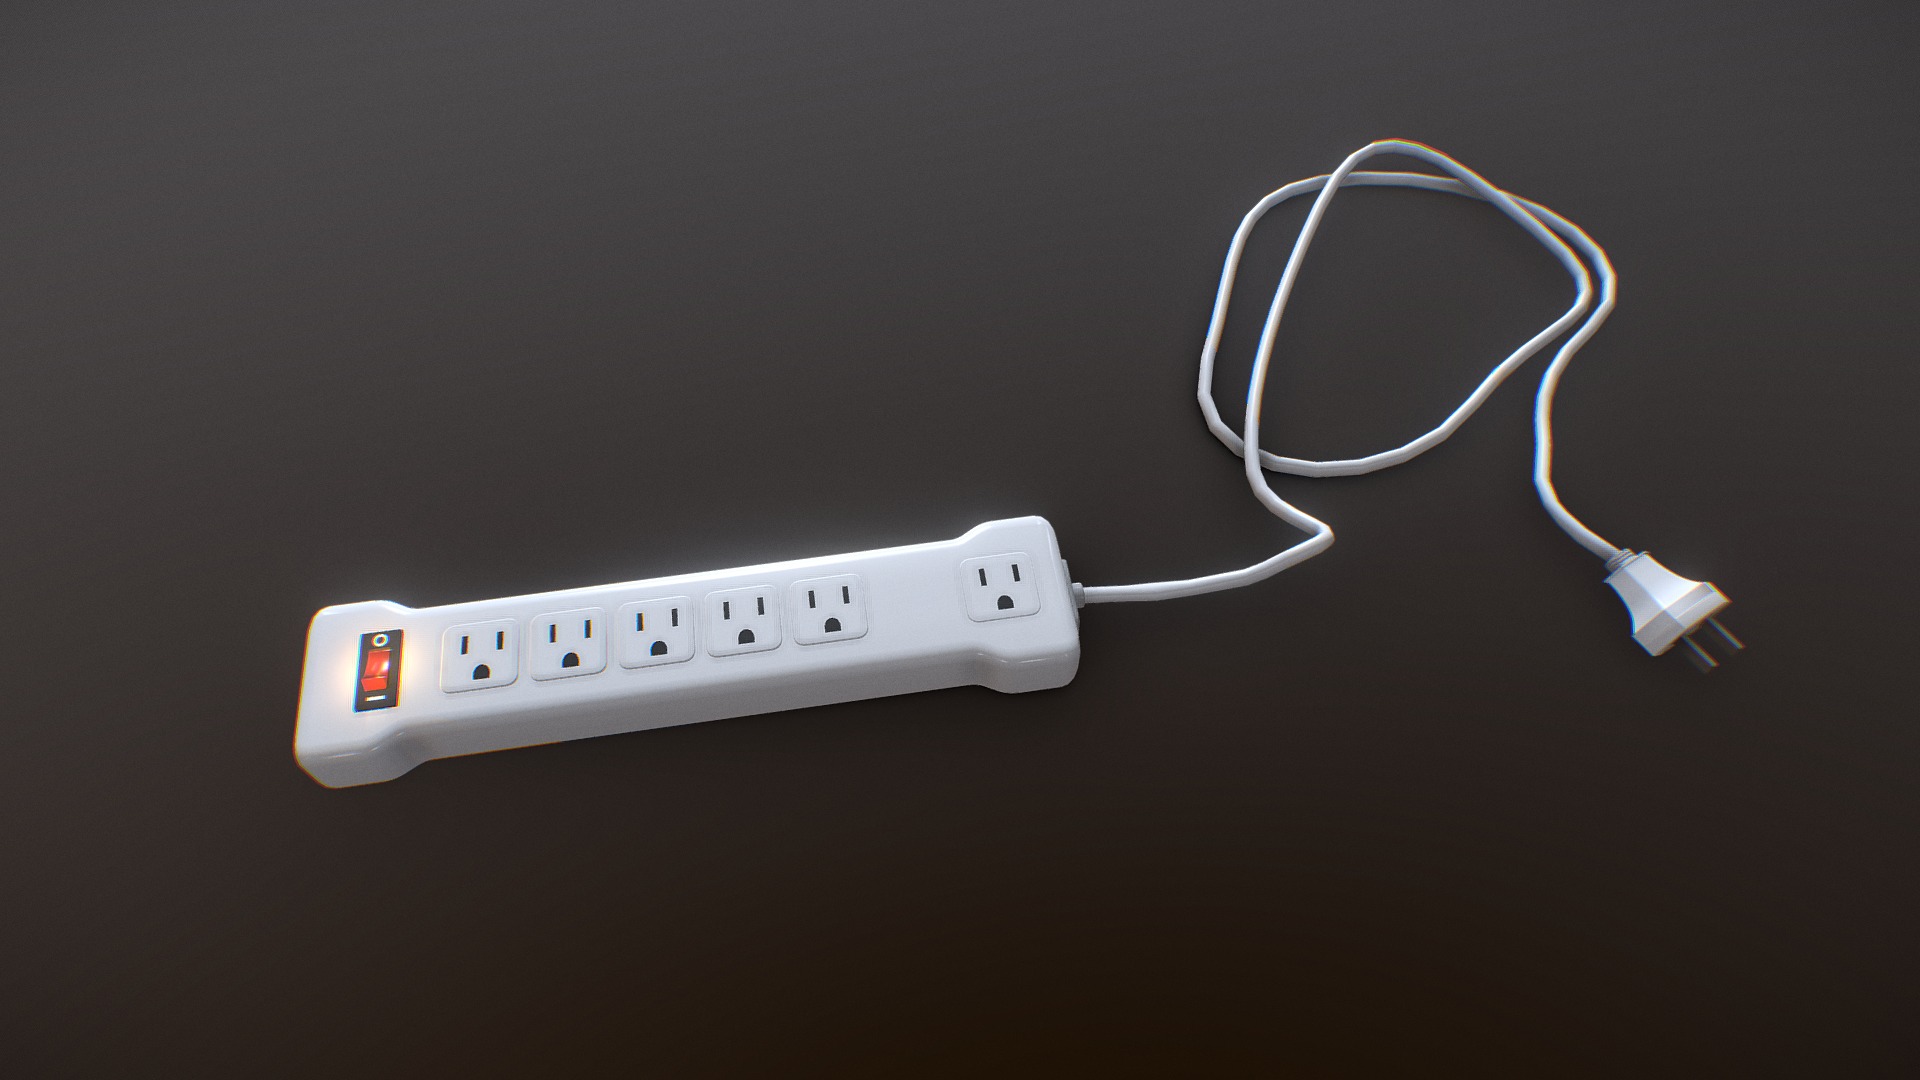 3D model American 110V Power Strip - This is a 3D model of the American 110V Power Strip. The 3D model is about a white usb cable.